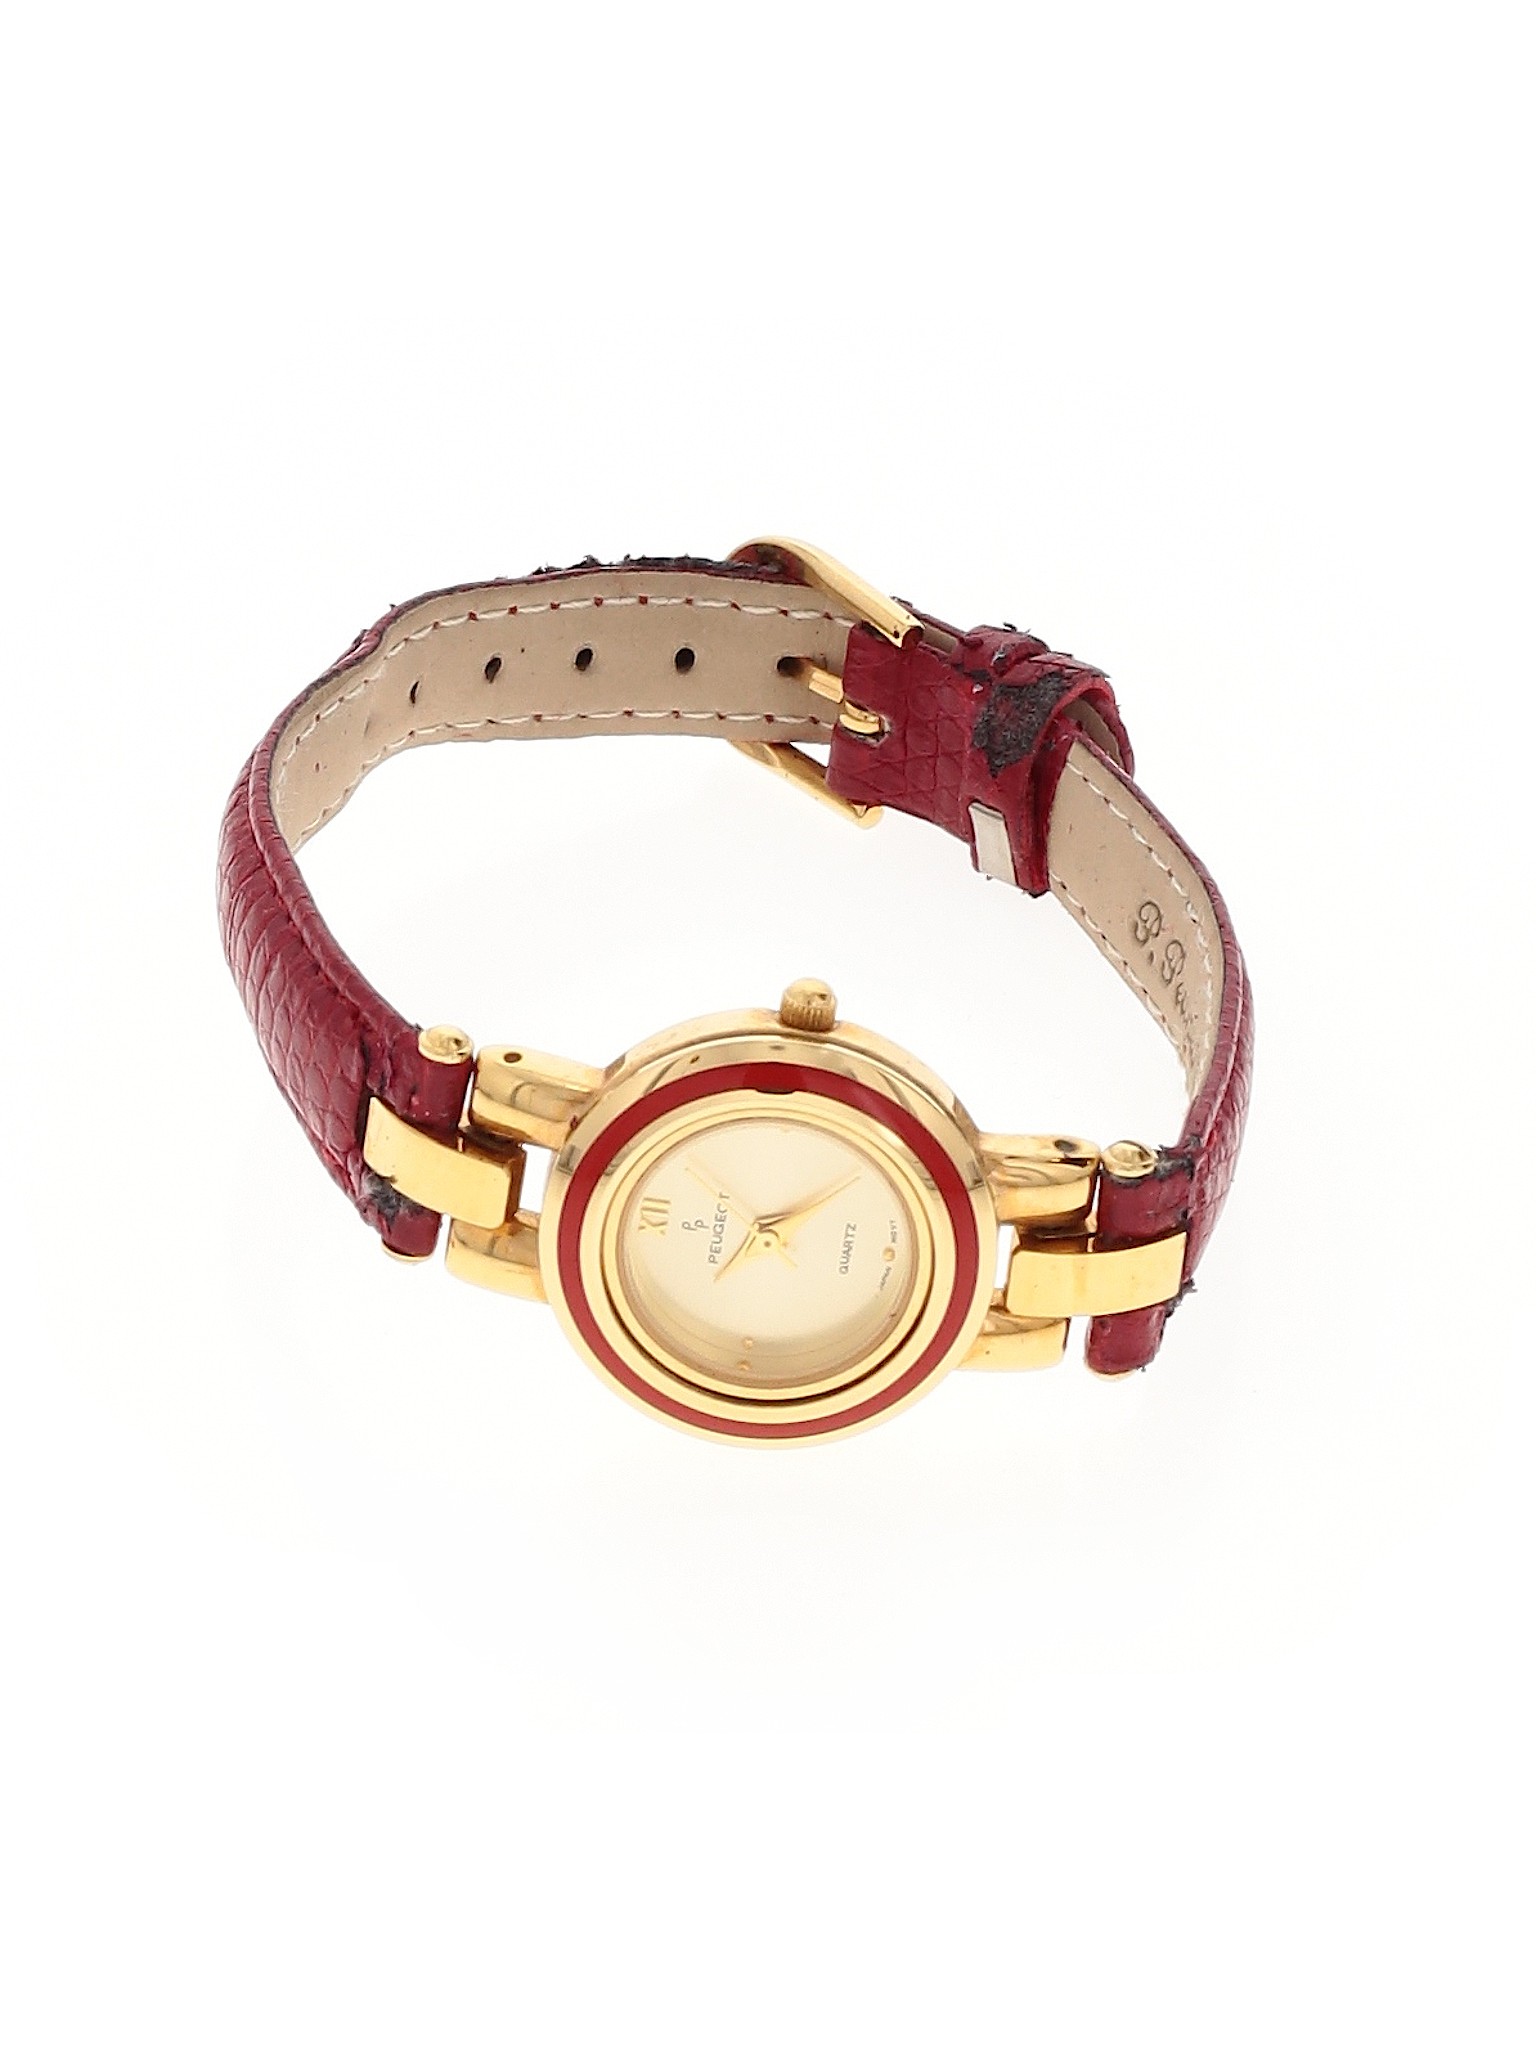 Peugeot Red Watch One Size - 84% off | thredUP